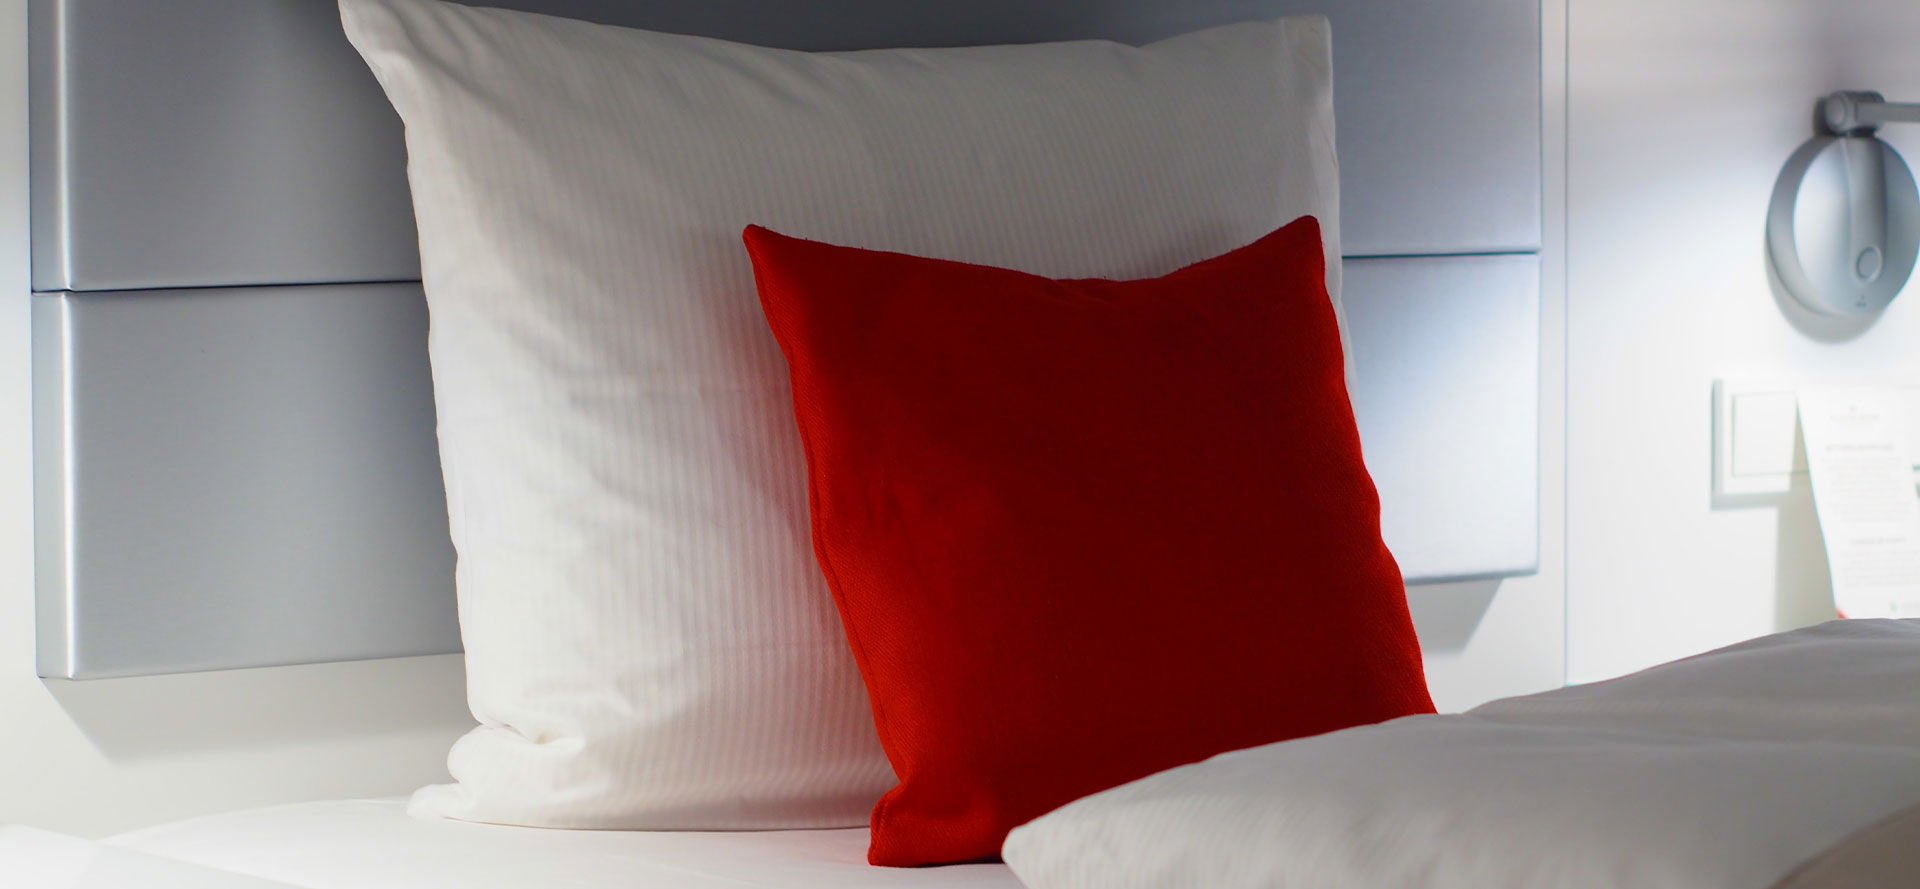 Hypoallergenic pillow on bed.